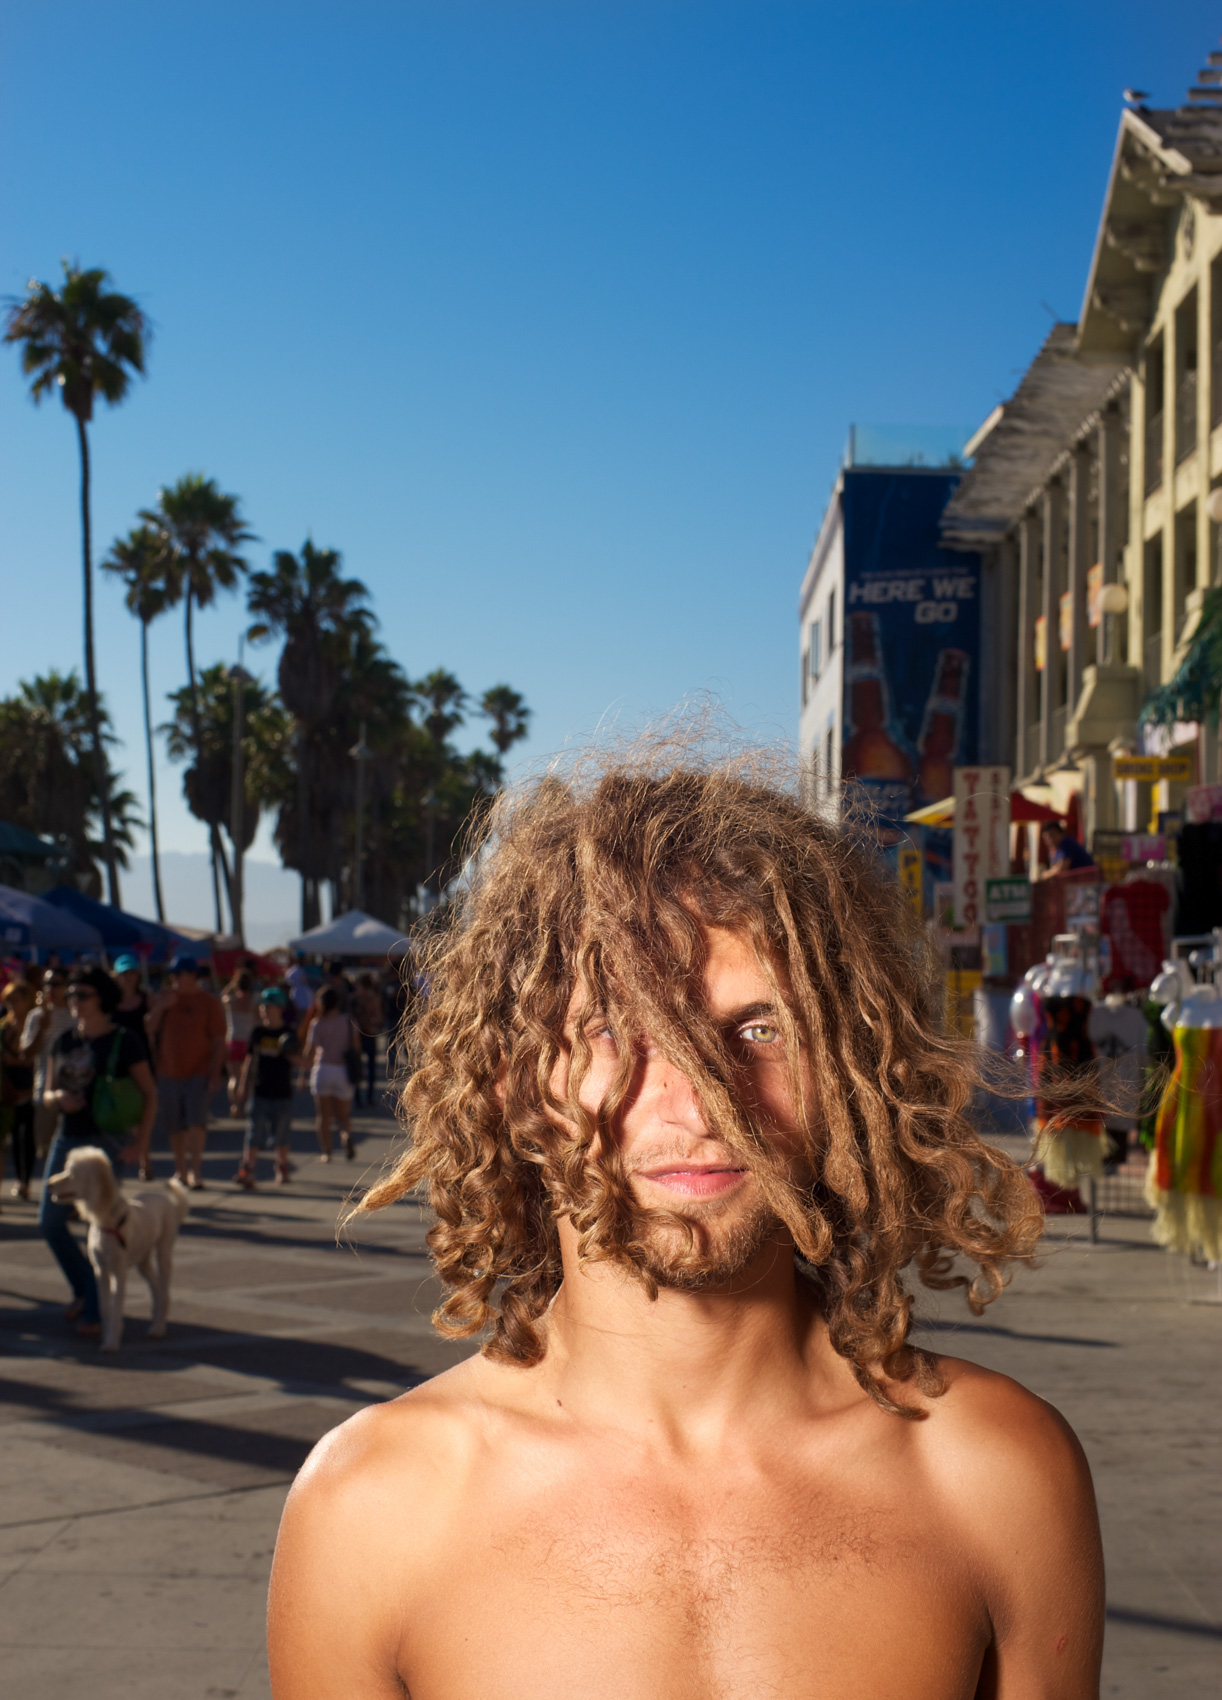 Portrait of a young man framed through curly hair on the Venice Beach boardwalk.